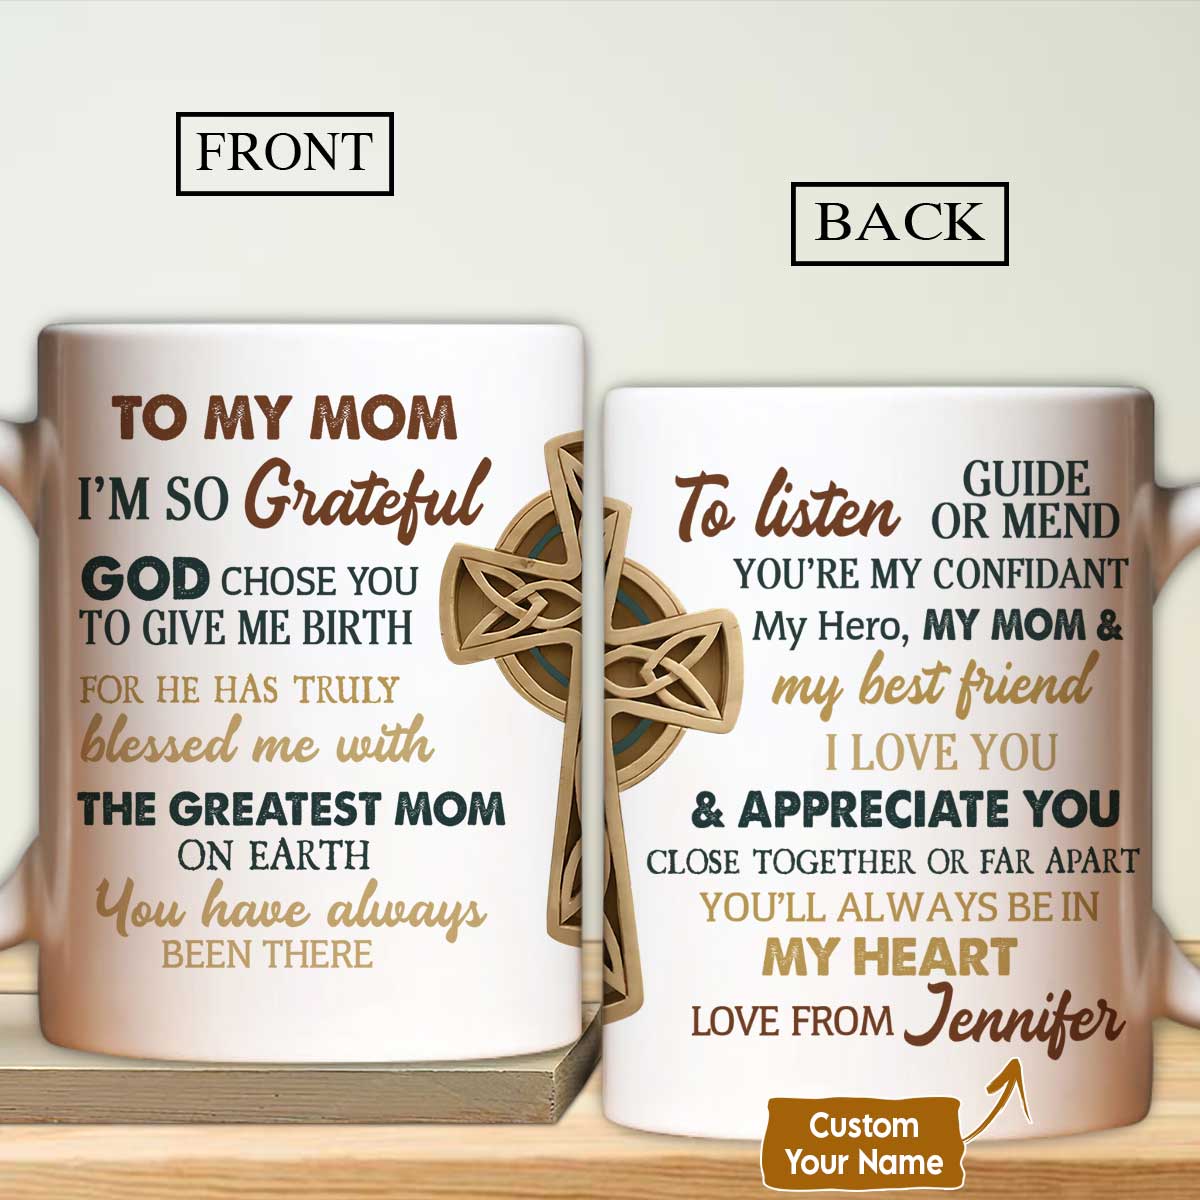 https://cdn.shopify.com/s/files/1/0676/3534/7734/products/33-mk-Daughter-to-mom_-Wooden-cross_-You-will-always-be-in-my-heart_1600x.jpg?v=1676519603